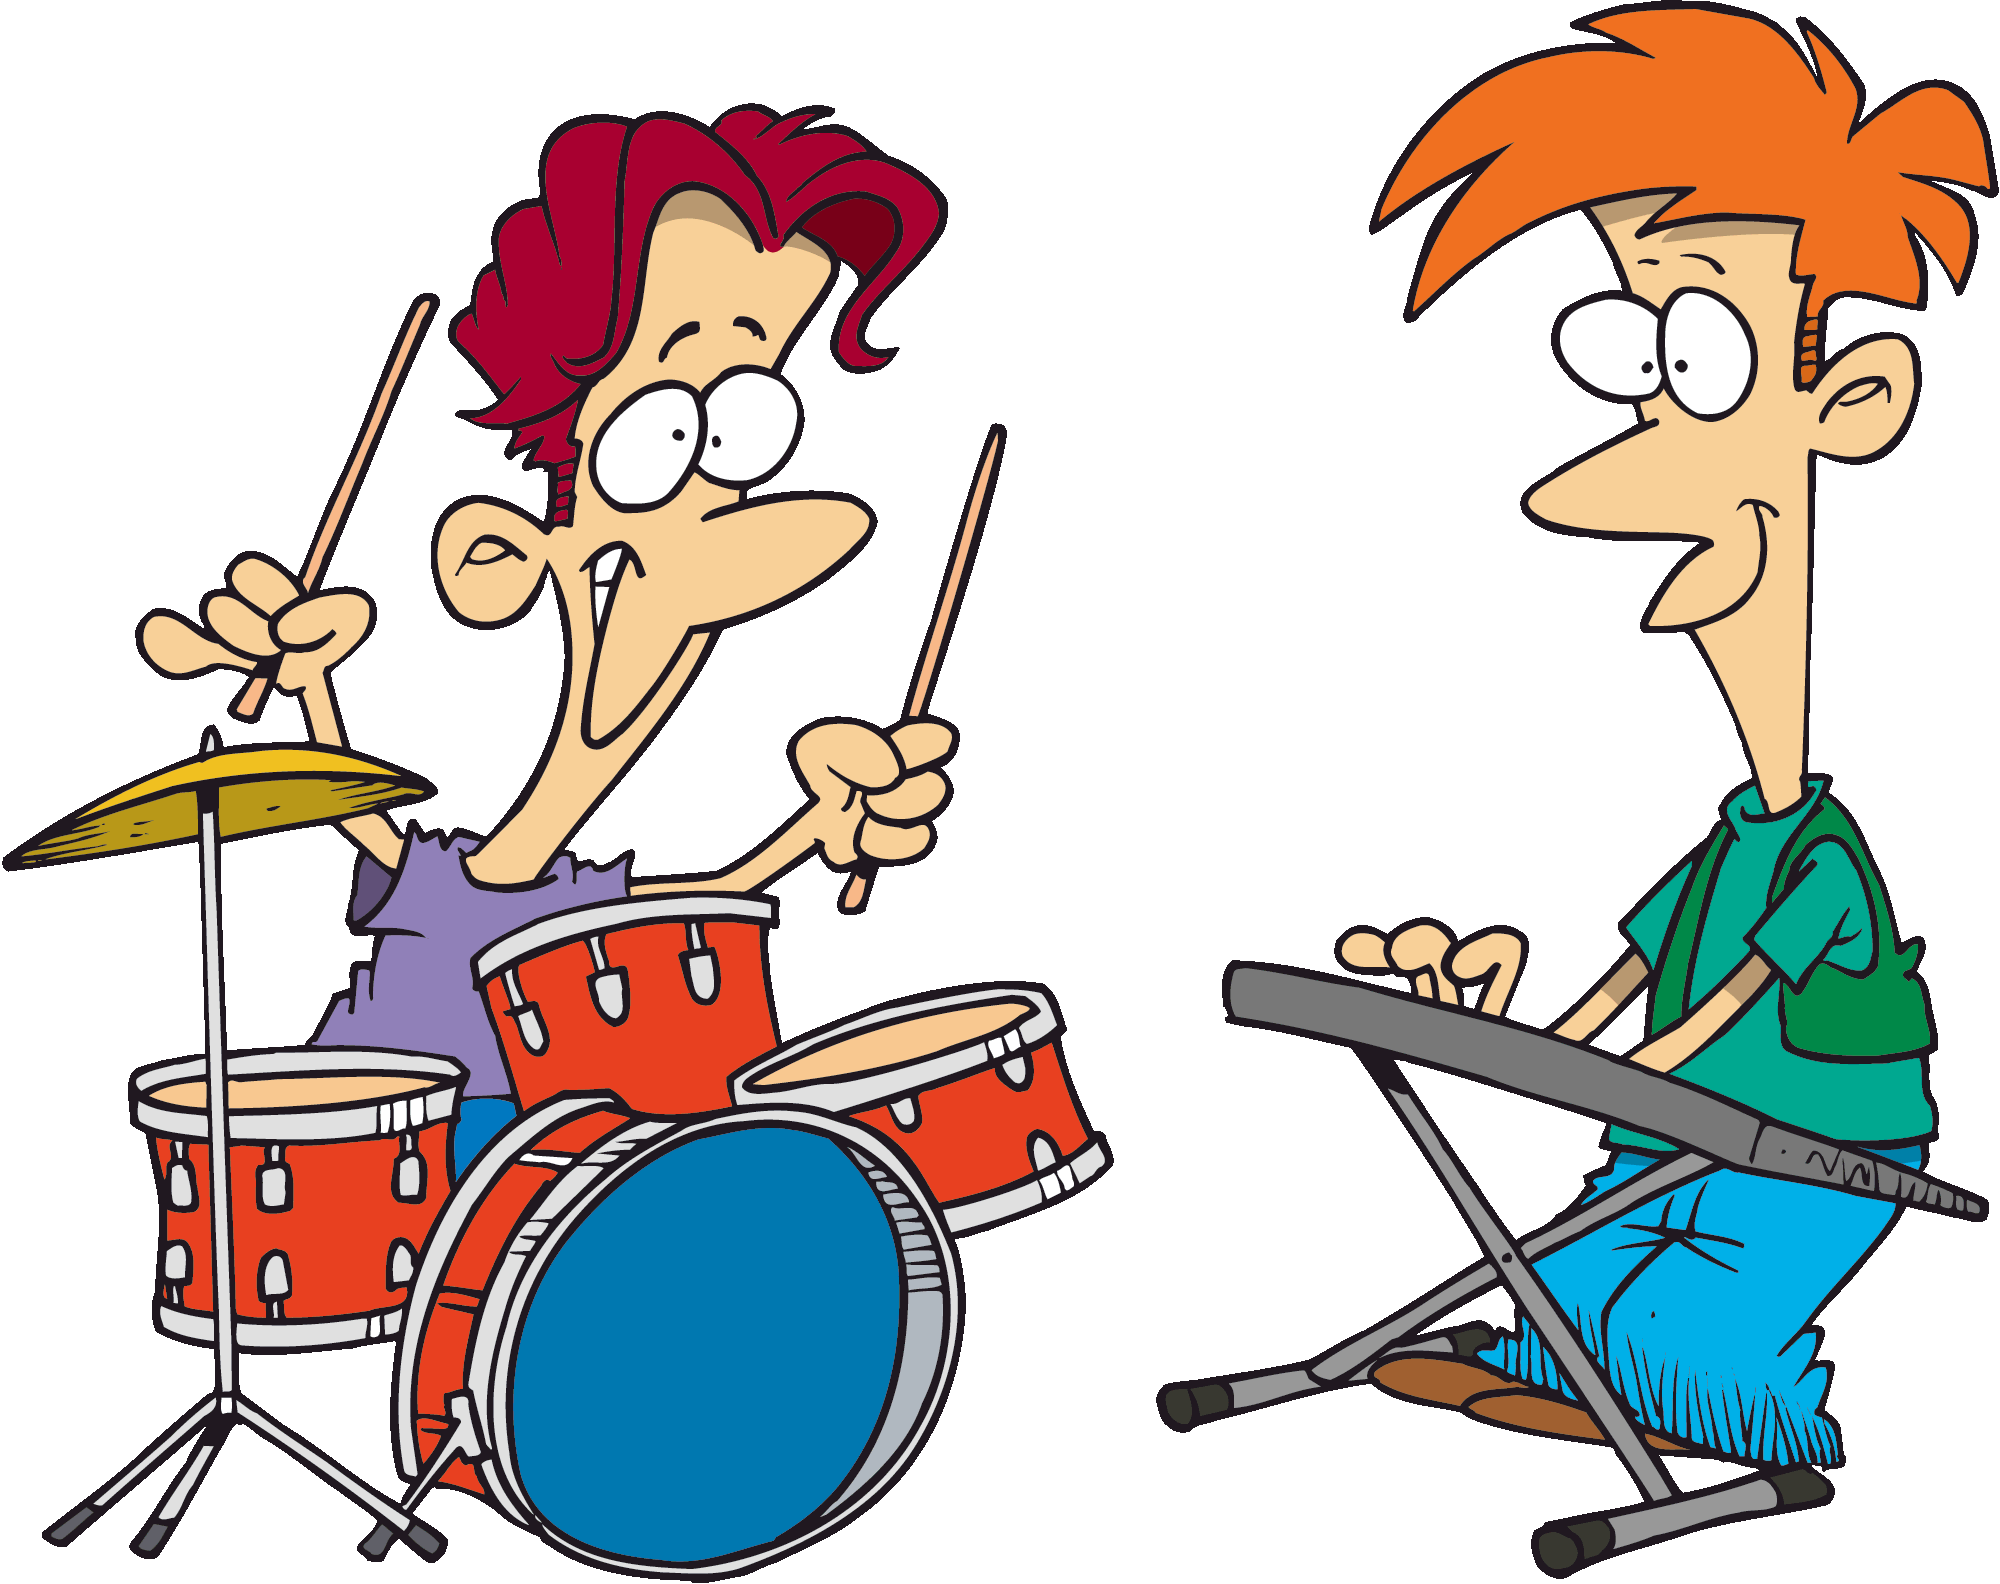 clipart music band instrument